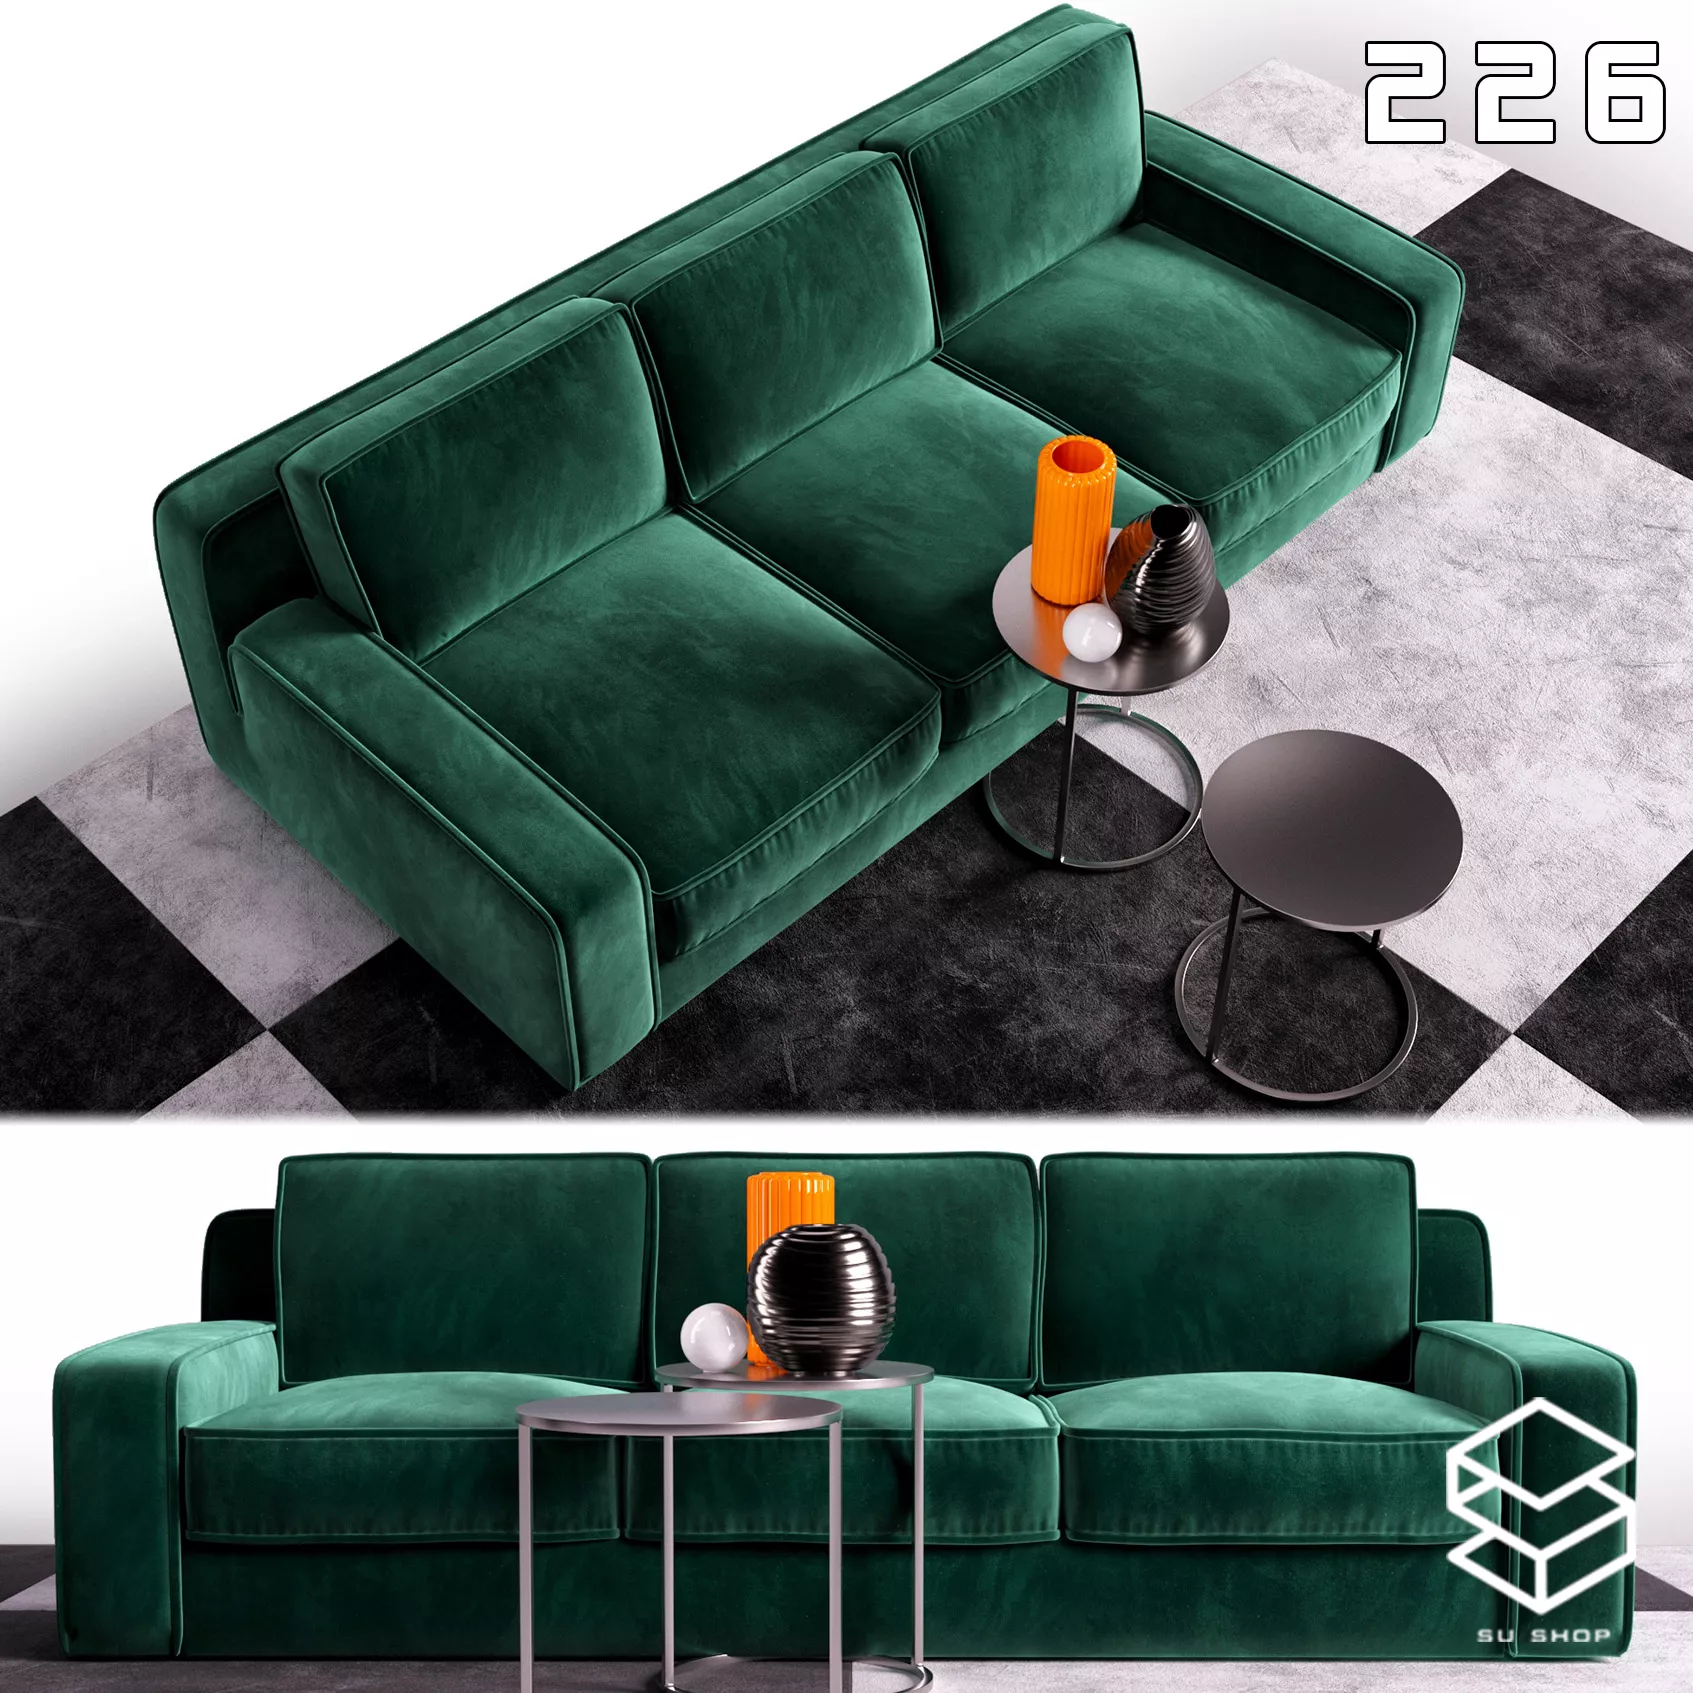 MODERN SOFA - SKETCHUP 3D MODEL - VRAY OR ENSCAPE - ID13526